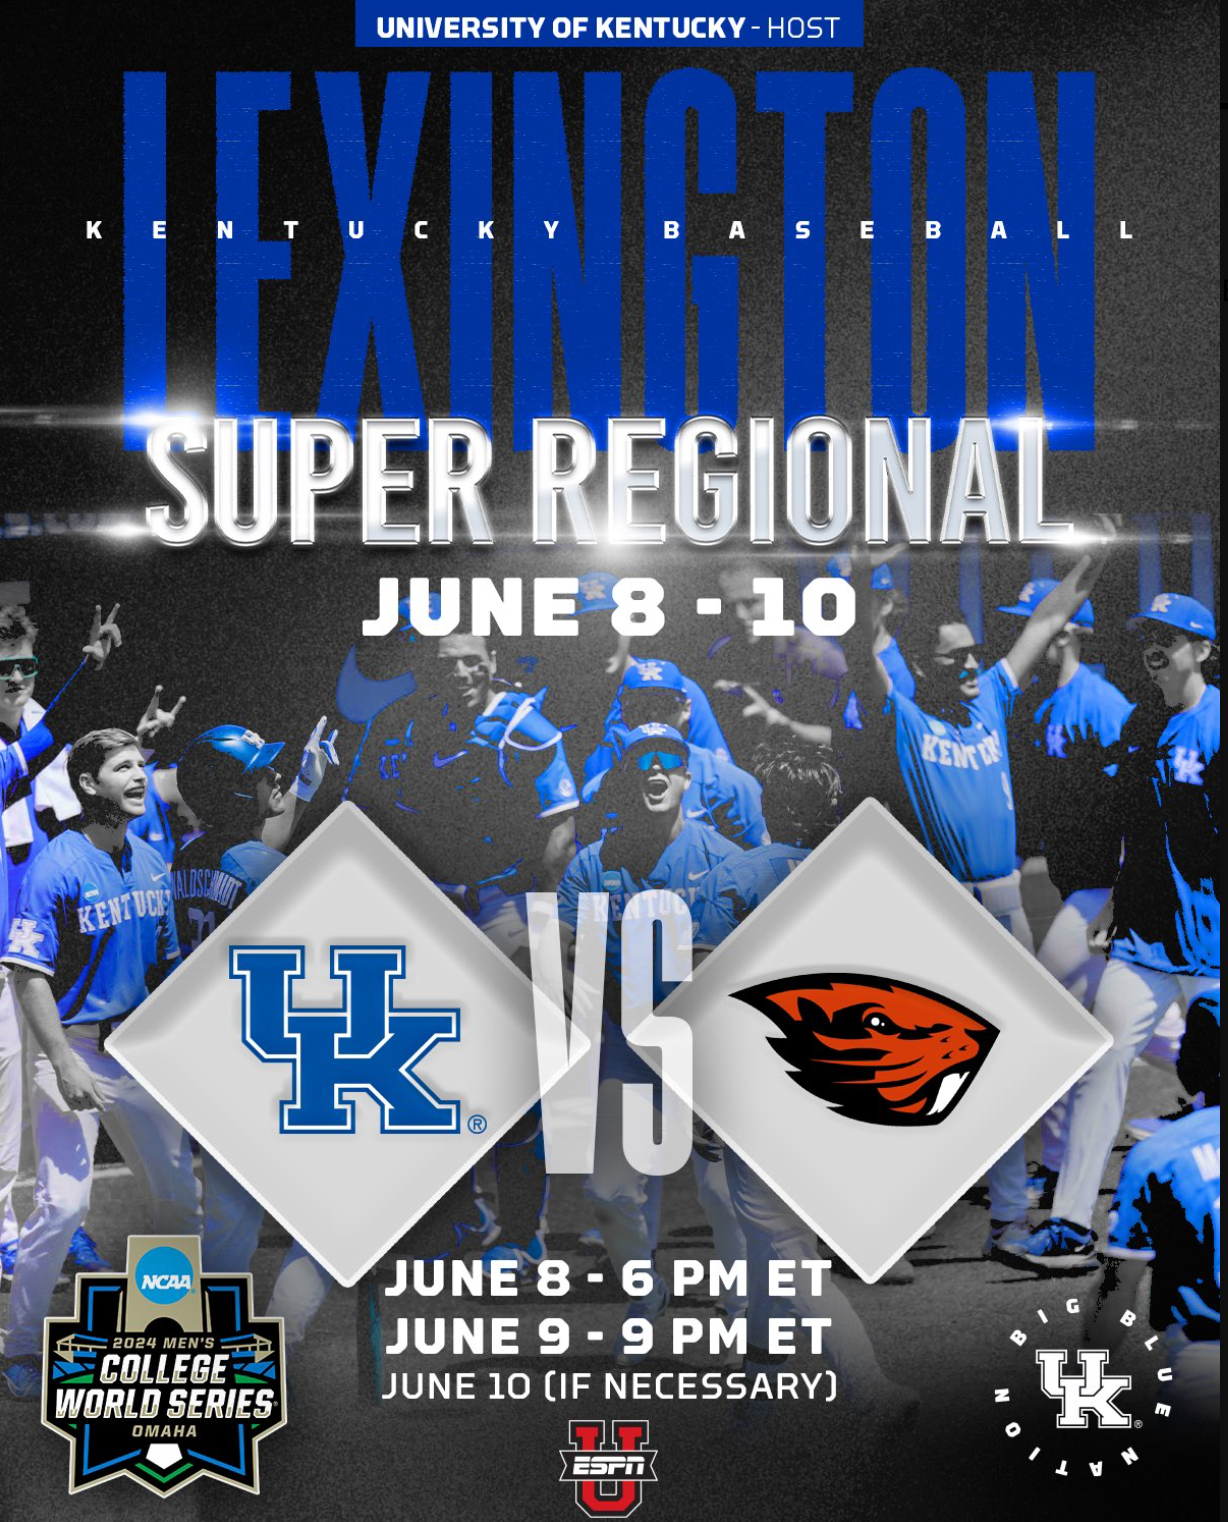 Listen to UK Sports Network Radio Coverage of Kentucky Baseball at the NCAA Tournament Super Regionals